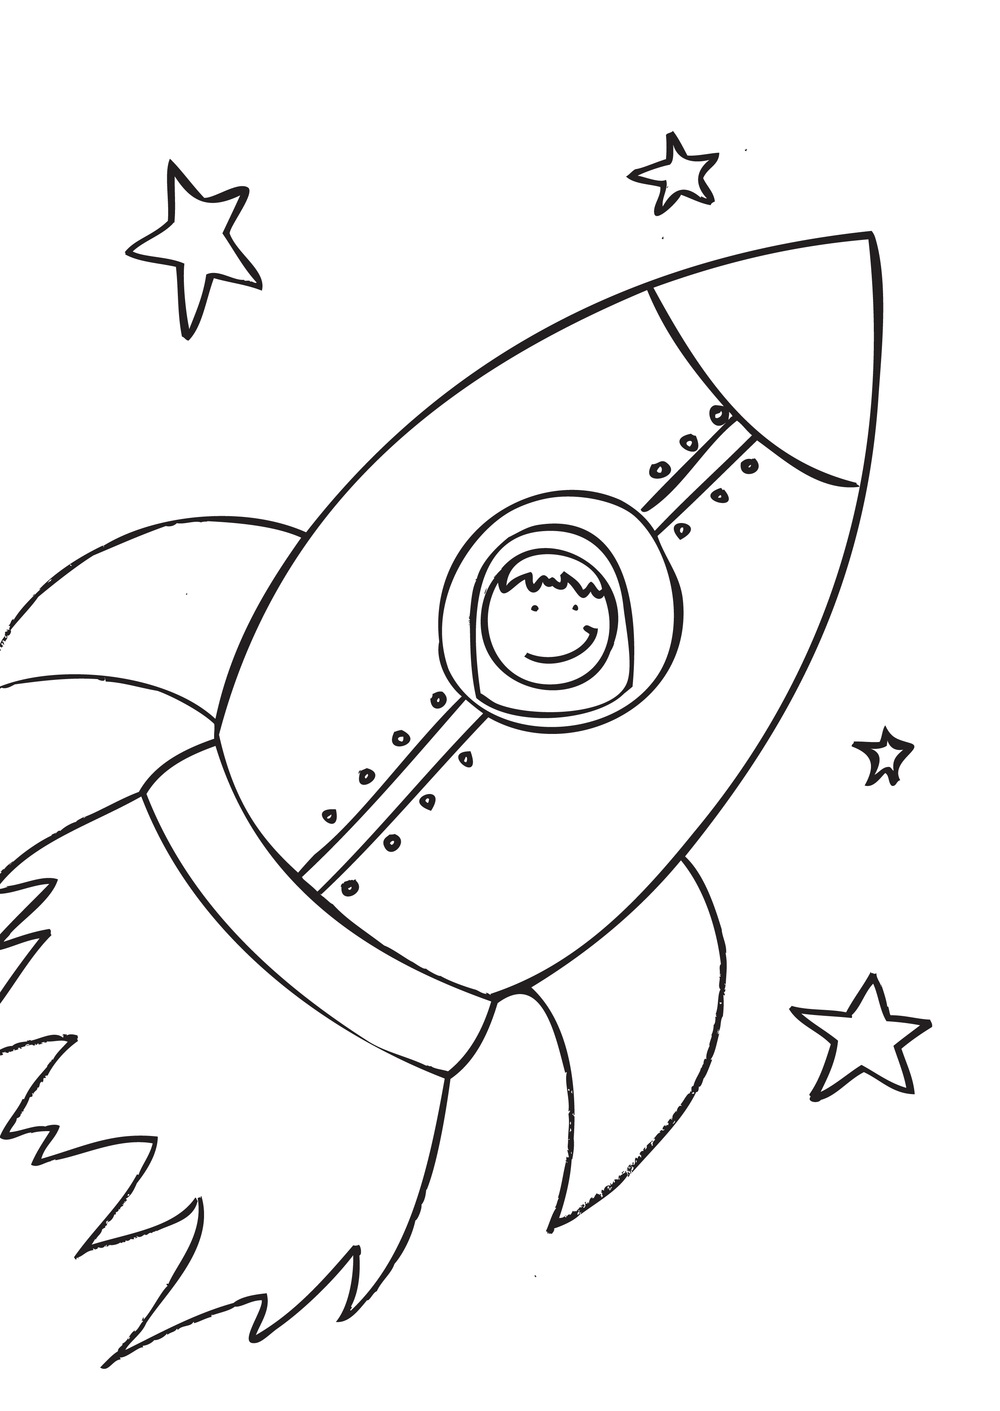 rocketships-coloring-pages